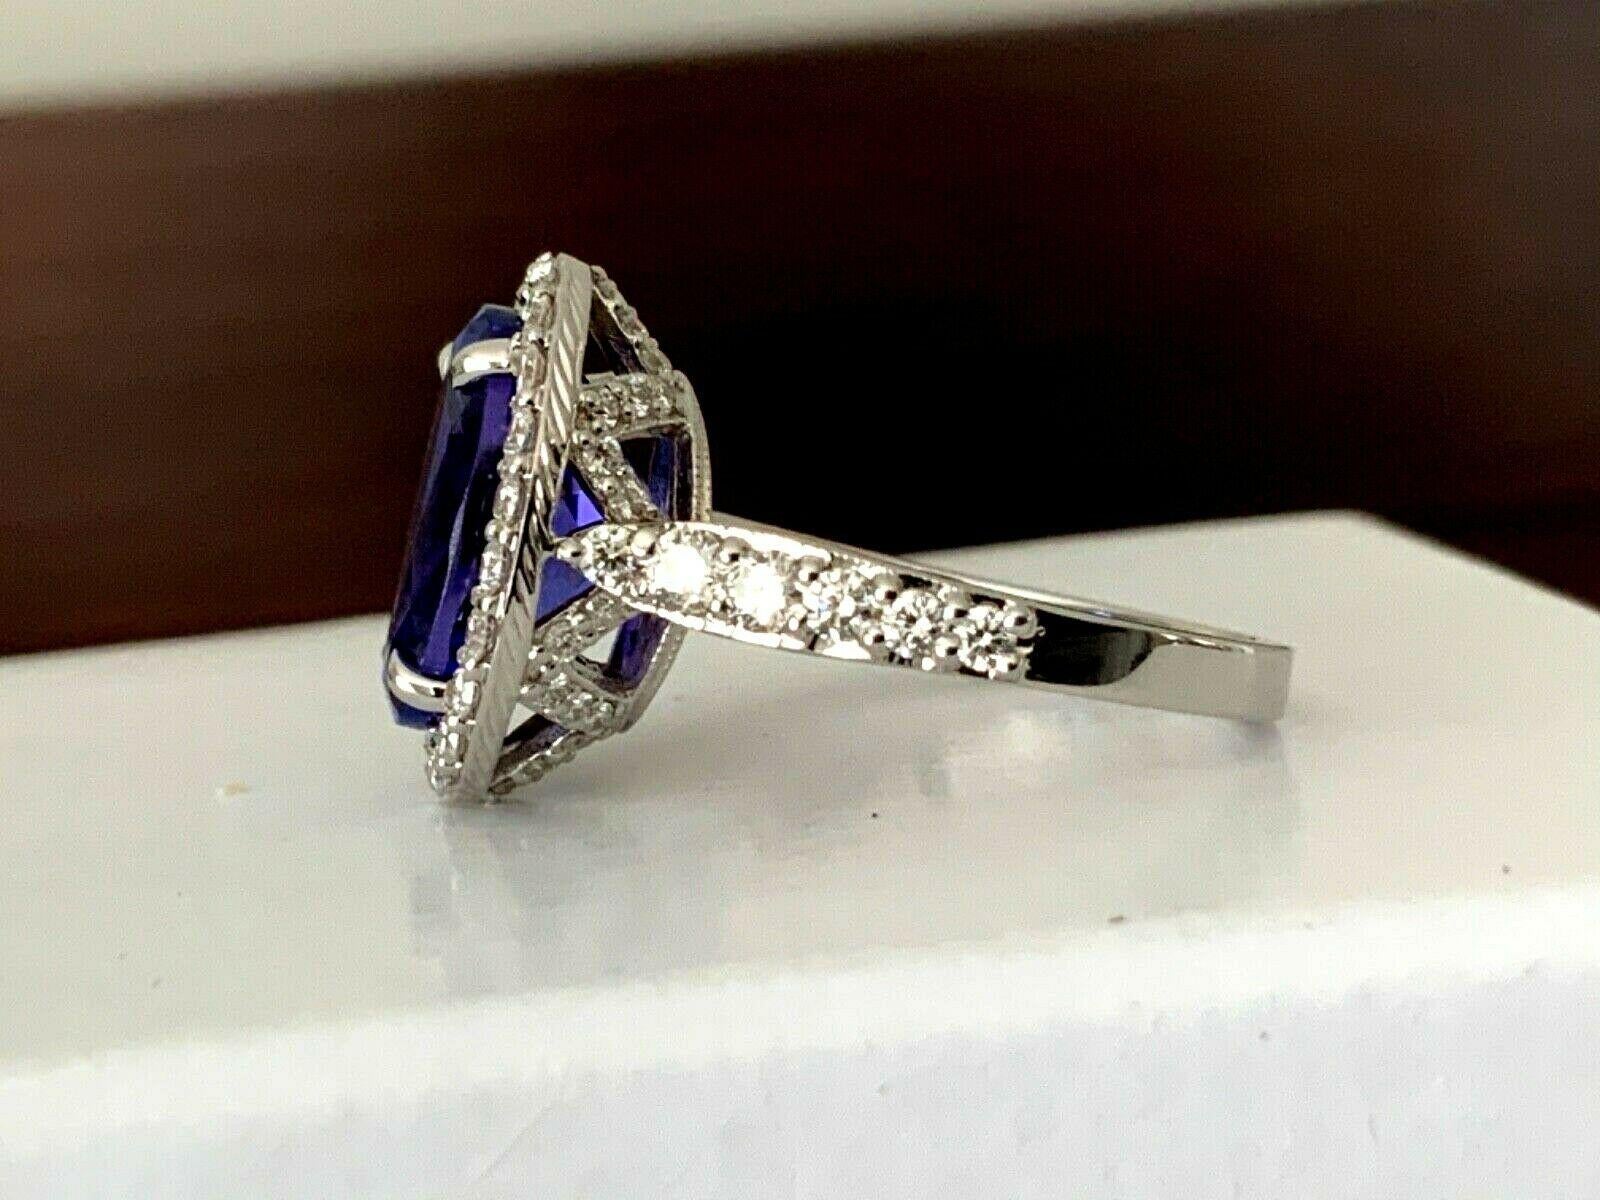 5.72 Carat Natural Oval Violet Tanzanite and Diamond Ring Platinum GIA Certified For Sale 4